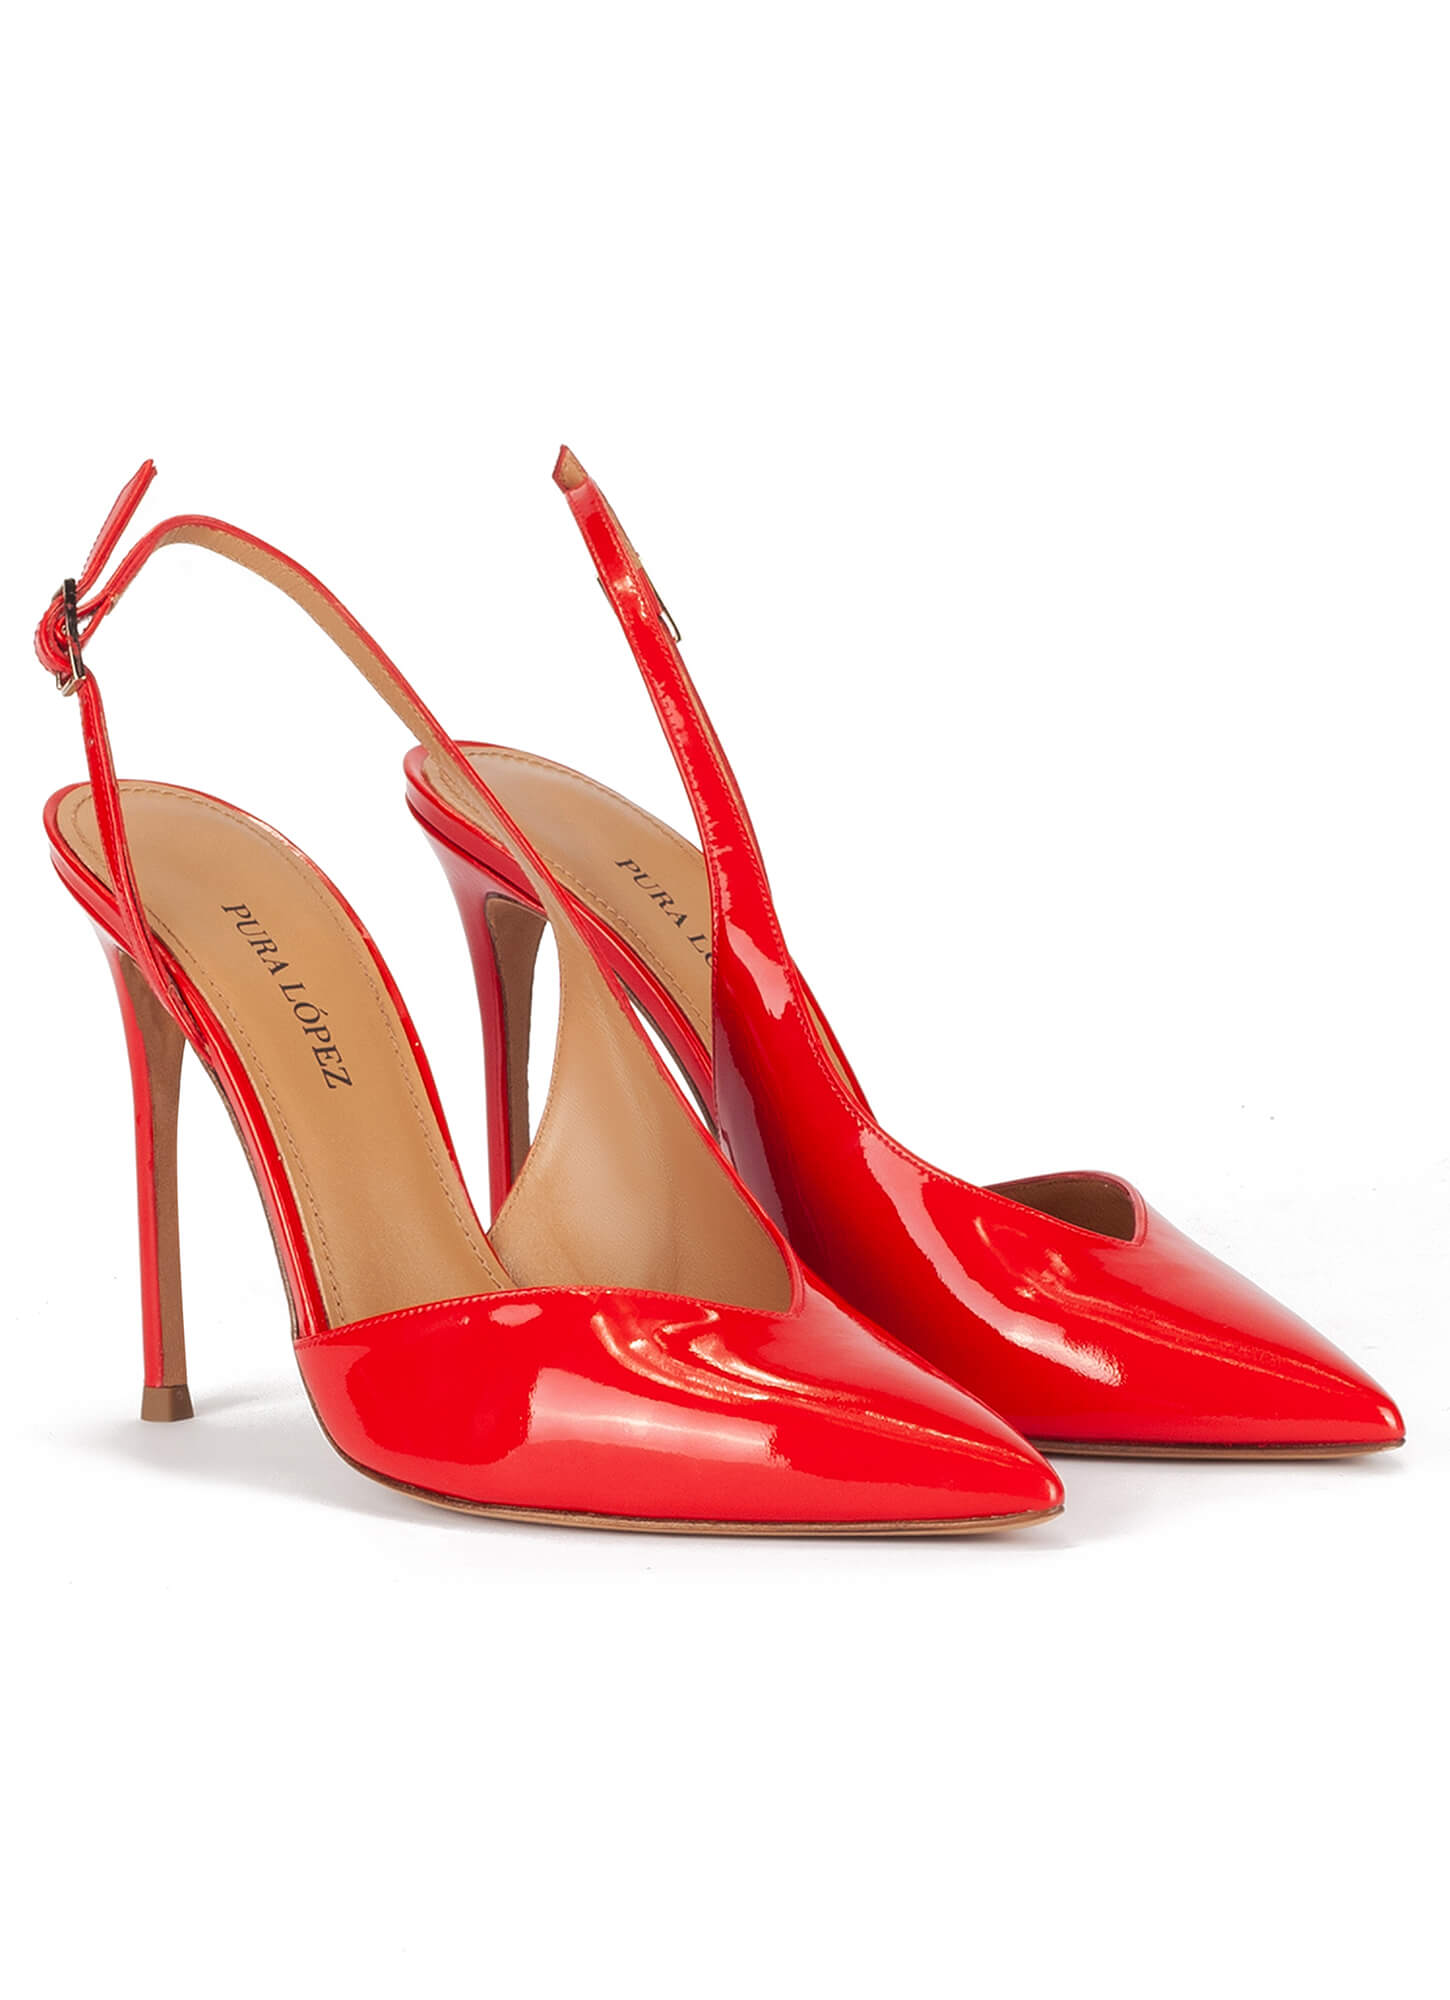 Red patent leather asymmetric heeled slingback pumps . PURA LOPEZ